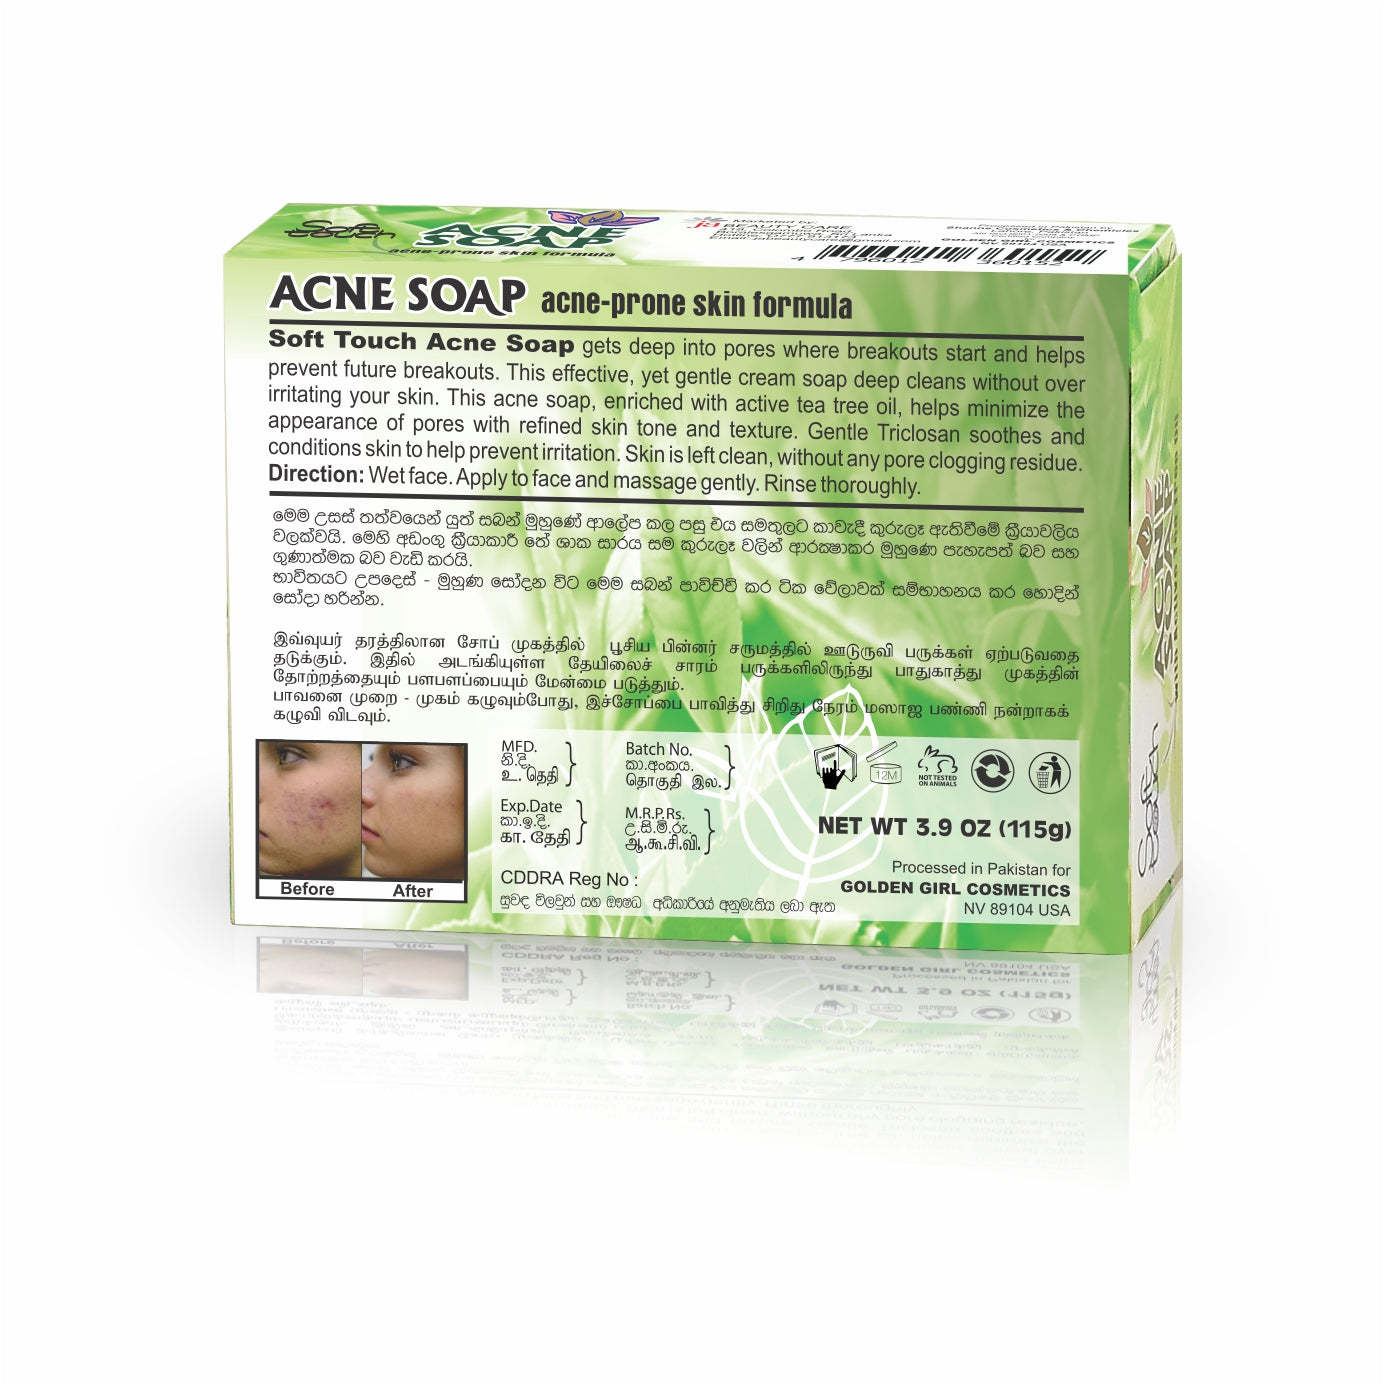 Acne Soap with active Tea Tree Oil 115gm - Golden Girl Cosmetics